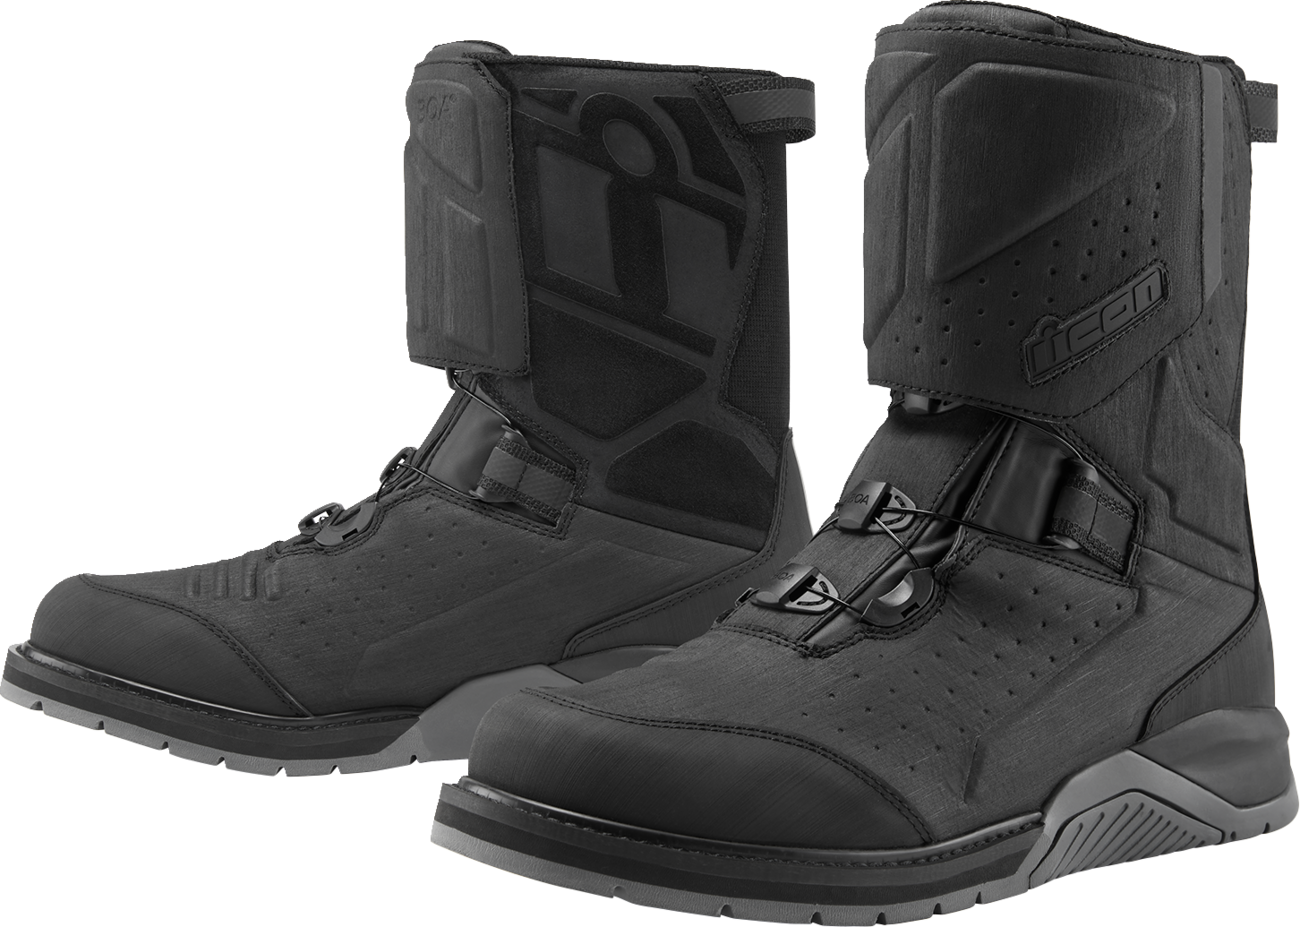 ICON Alcan Waterproof Boots - Black - Size 8 3403-1233